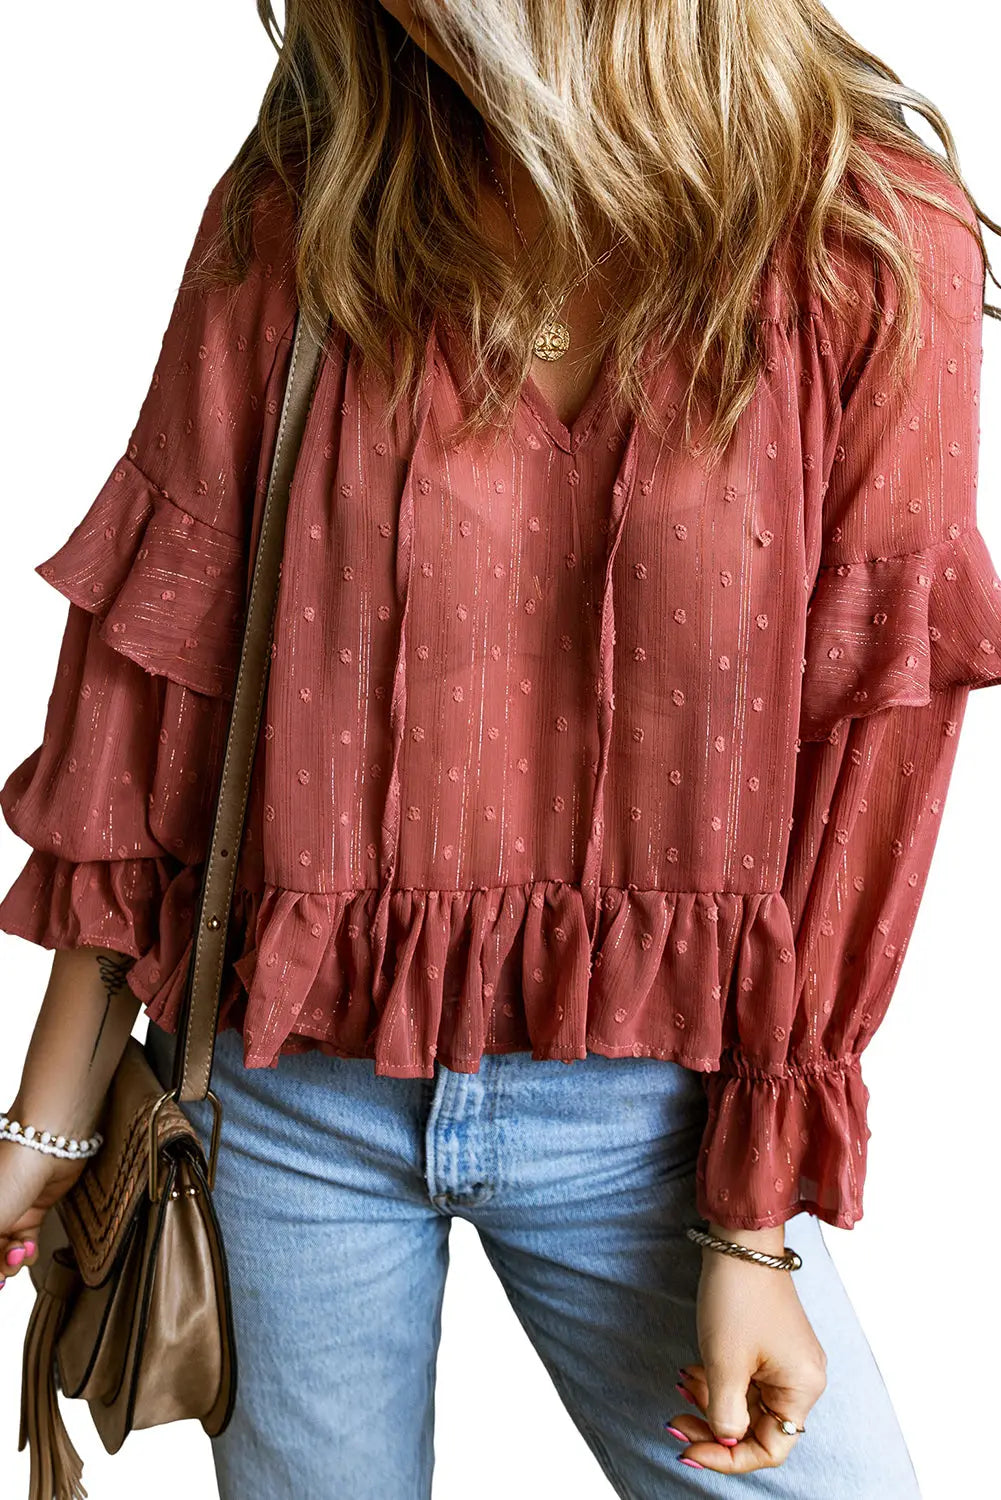 Red swiss dot lace up v neck ruffled blouse - tops